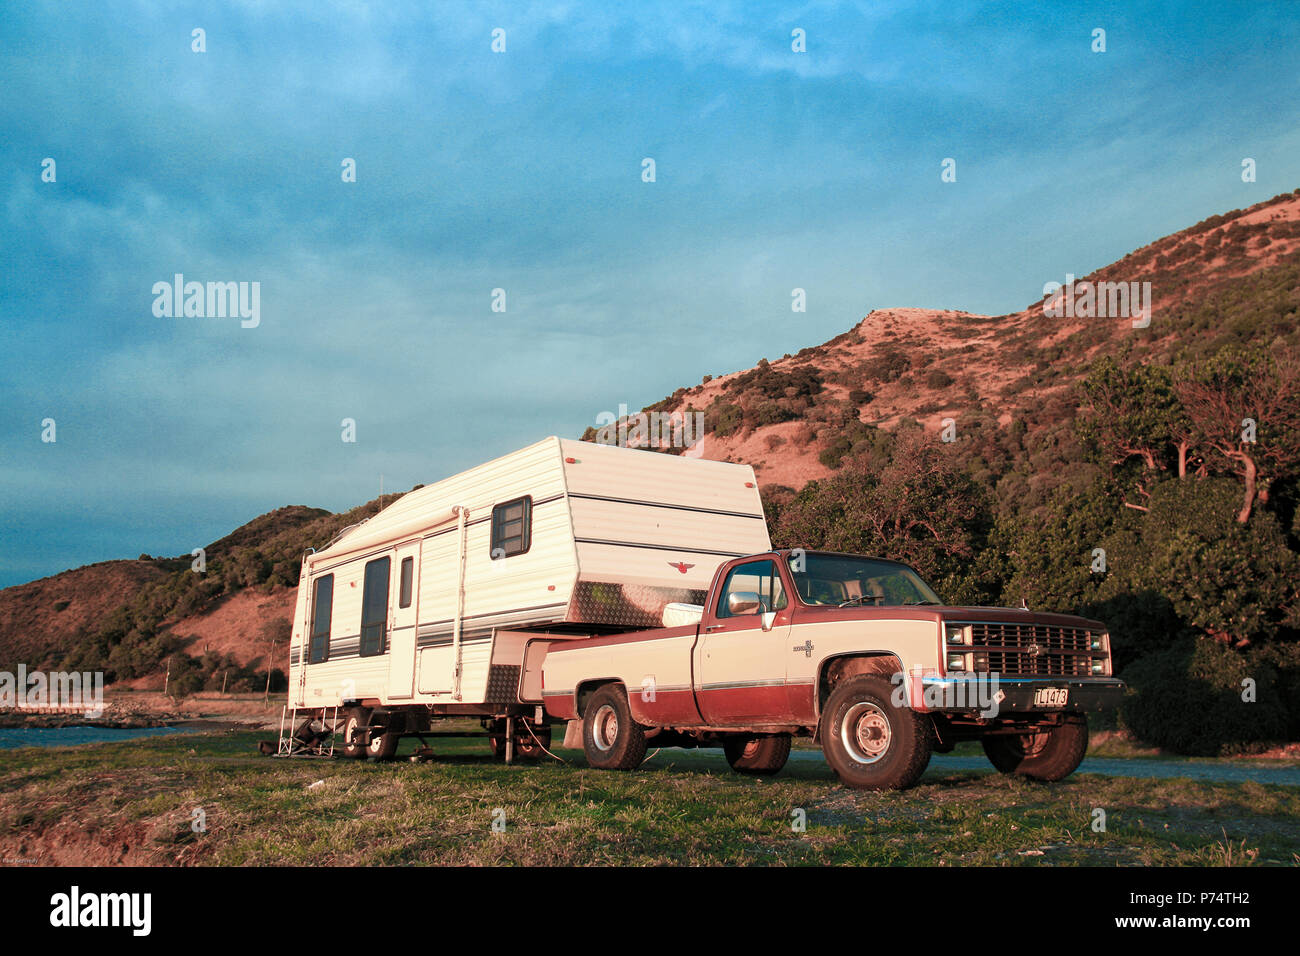 American pickup truck with caravan parked at camping spot of the Kaikoura coastline, New Zealand Stock Photo